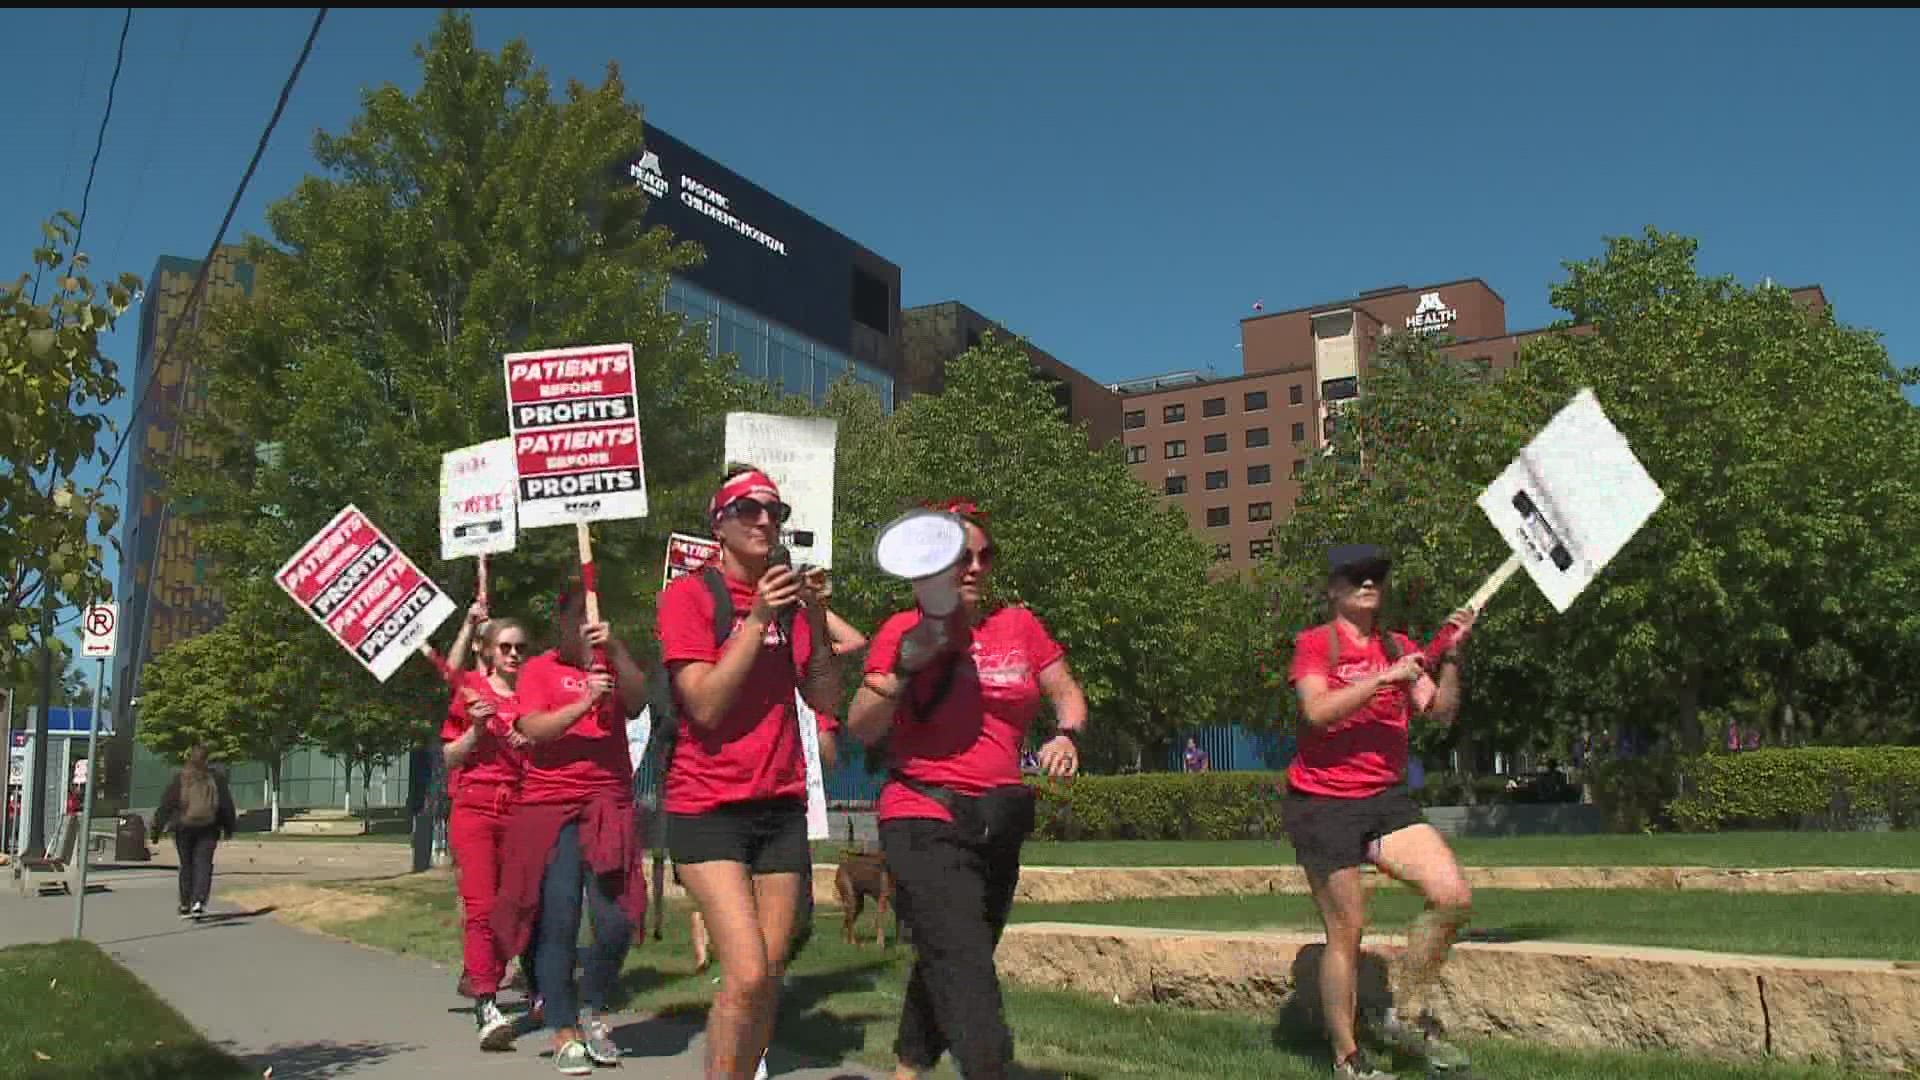 Workers at both healthcare facilities filed a 10-day notice before the strike begins Oct. 3.